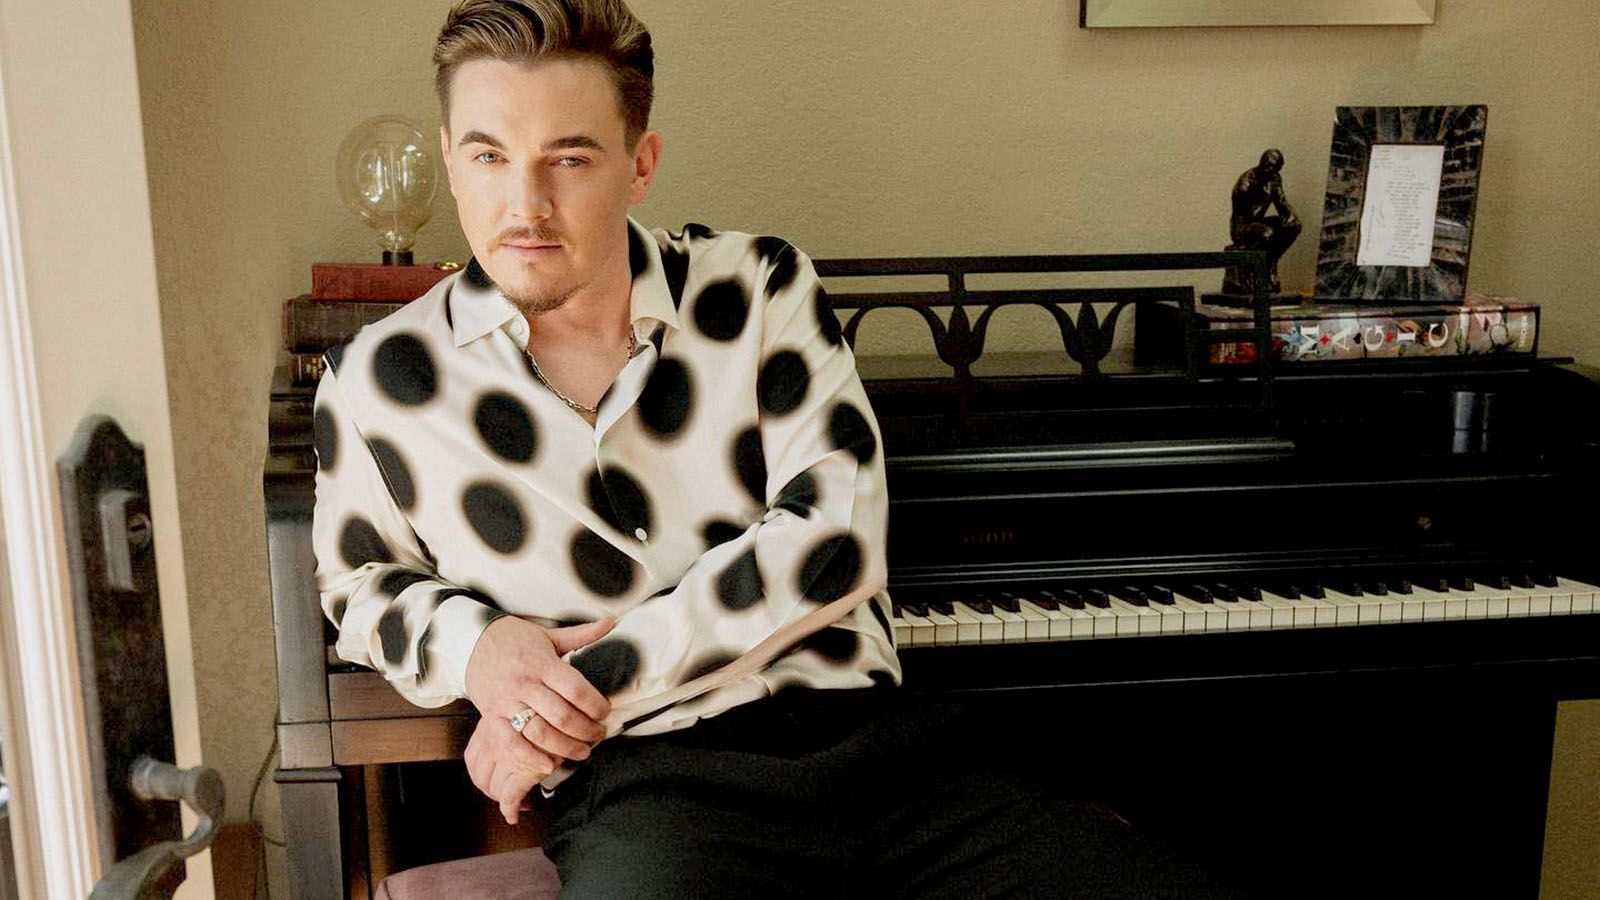 Pop singer Jesse McCartney will be at The Clyde Theatre on Oct. 9.